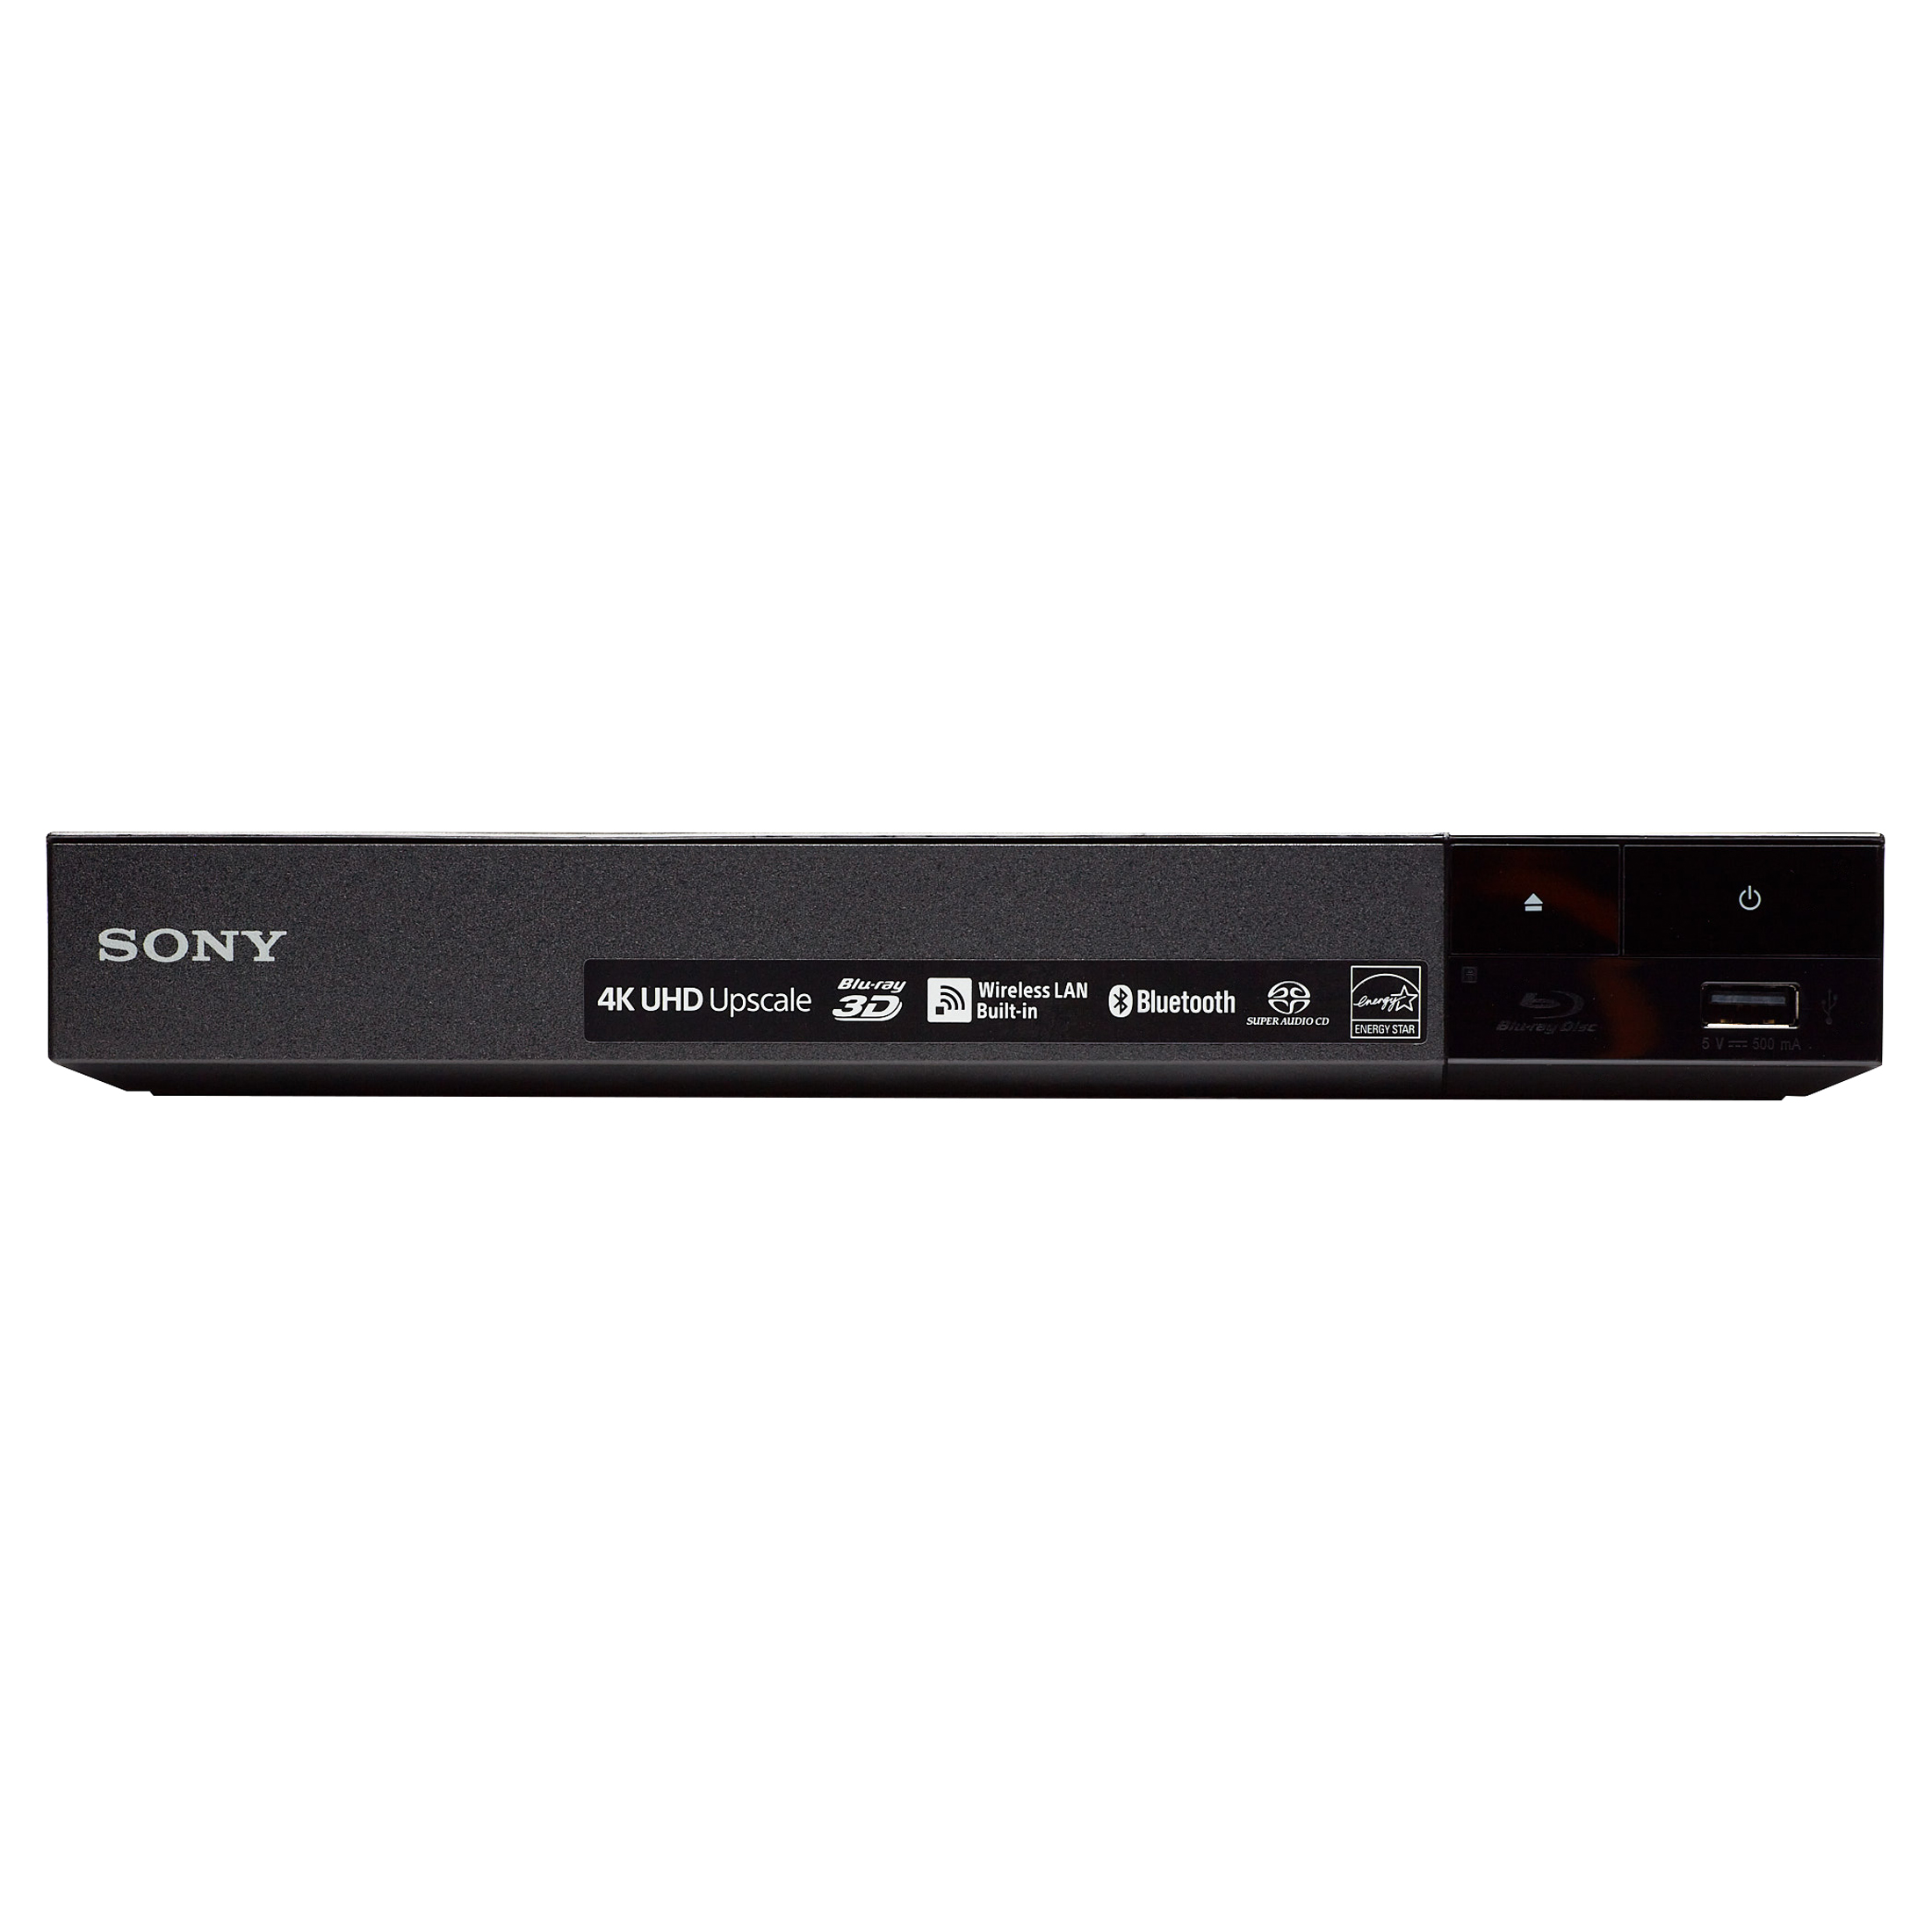 Sony BDP-S6700 4K Upscaling 3D Home Theater Streaming Blu-Ray DVD Player with Wi-Fi, Dolby Digital TrueHD/DTS, and upscaling - image 5 of 10